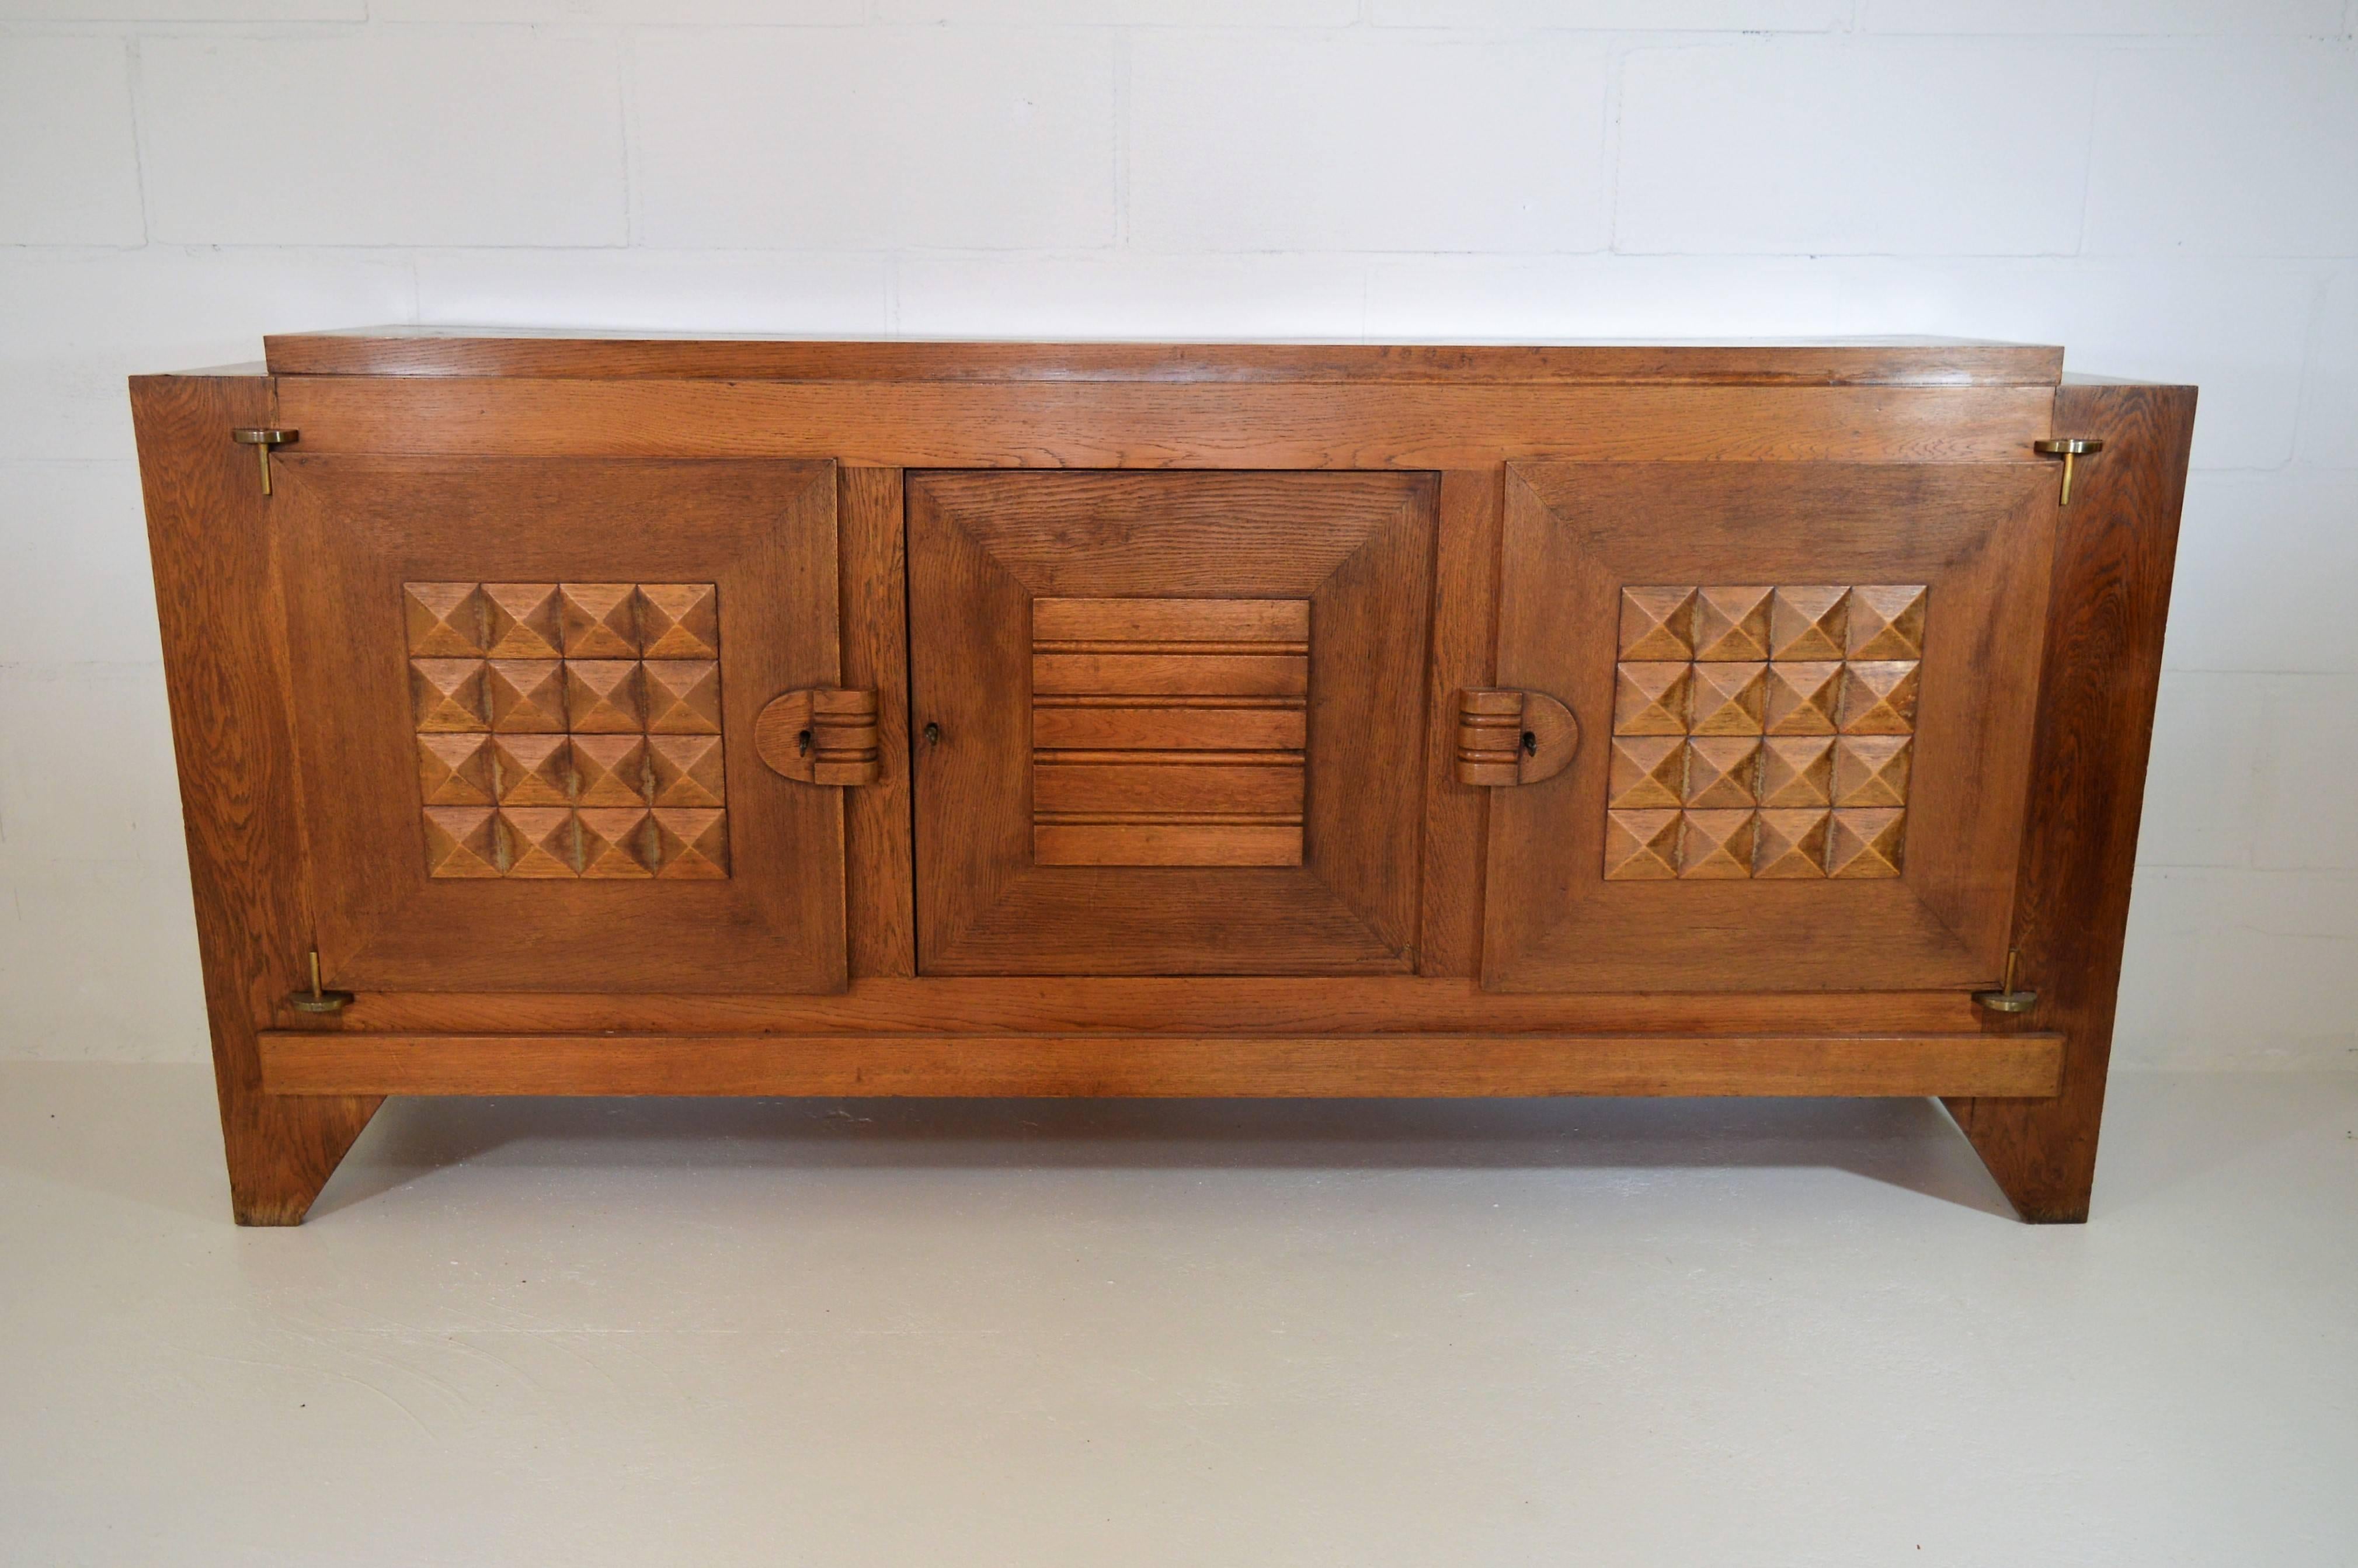 Early sideboard in oak by Charles Dudouyt, created in the 1930s. This sideboard remains in his original unrestored condition.